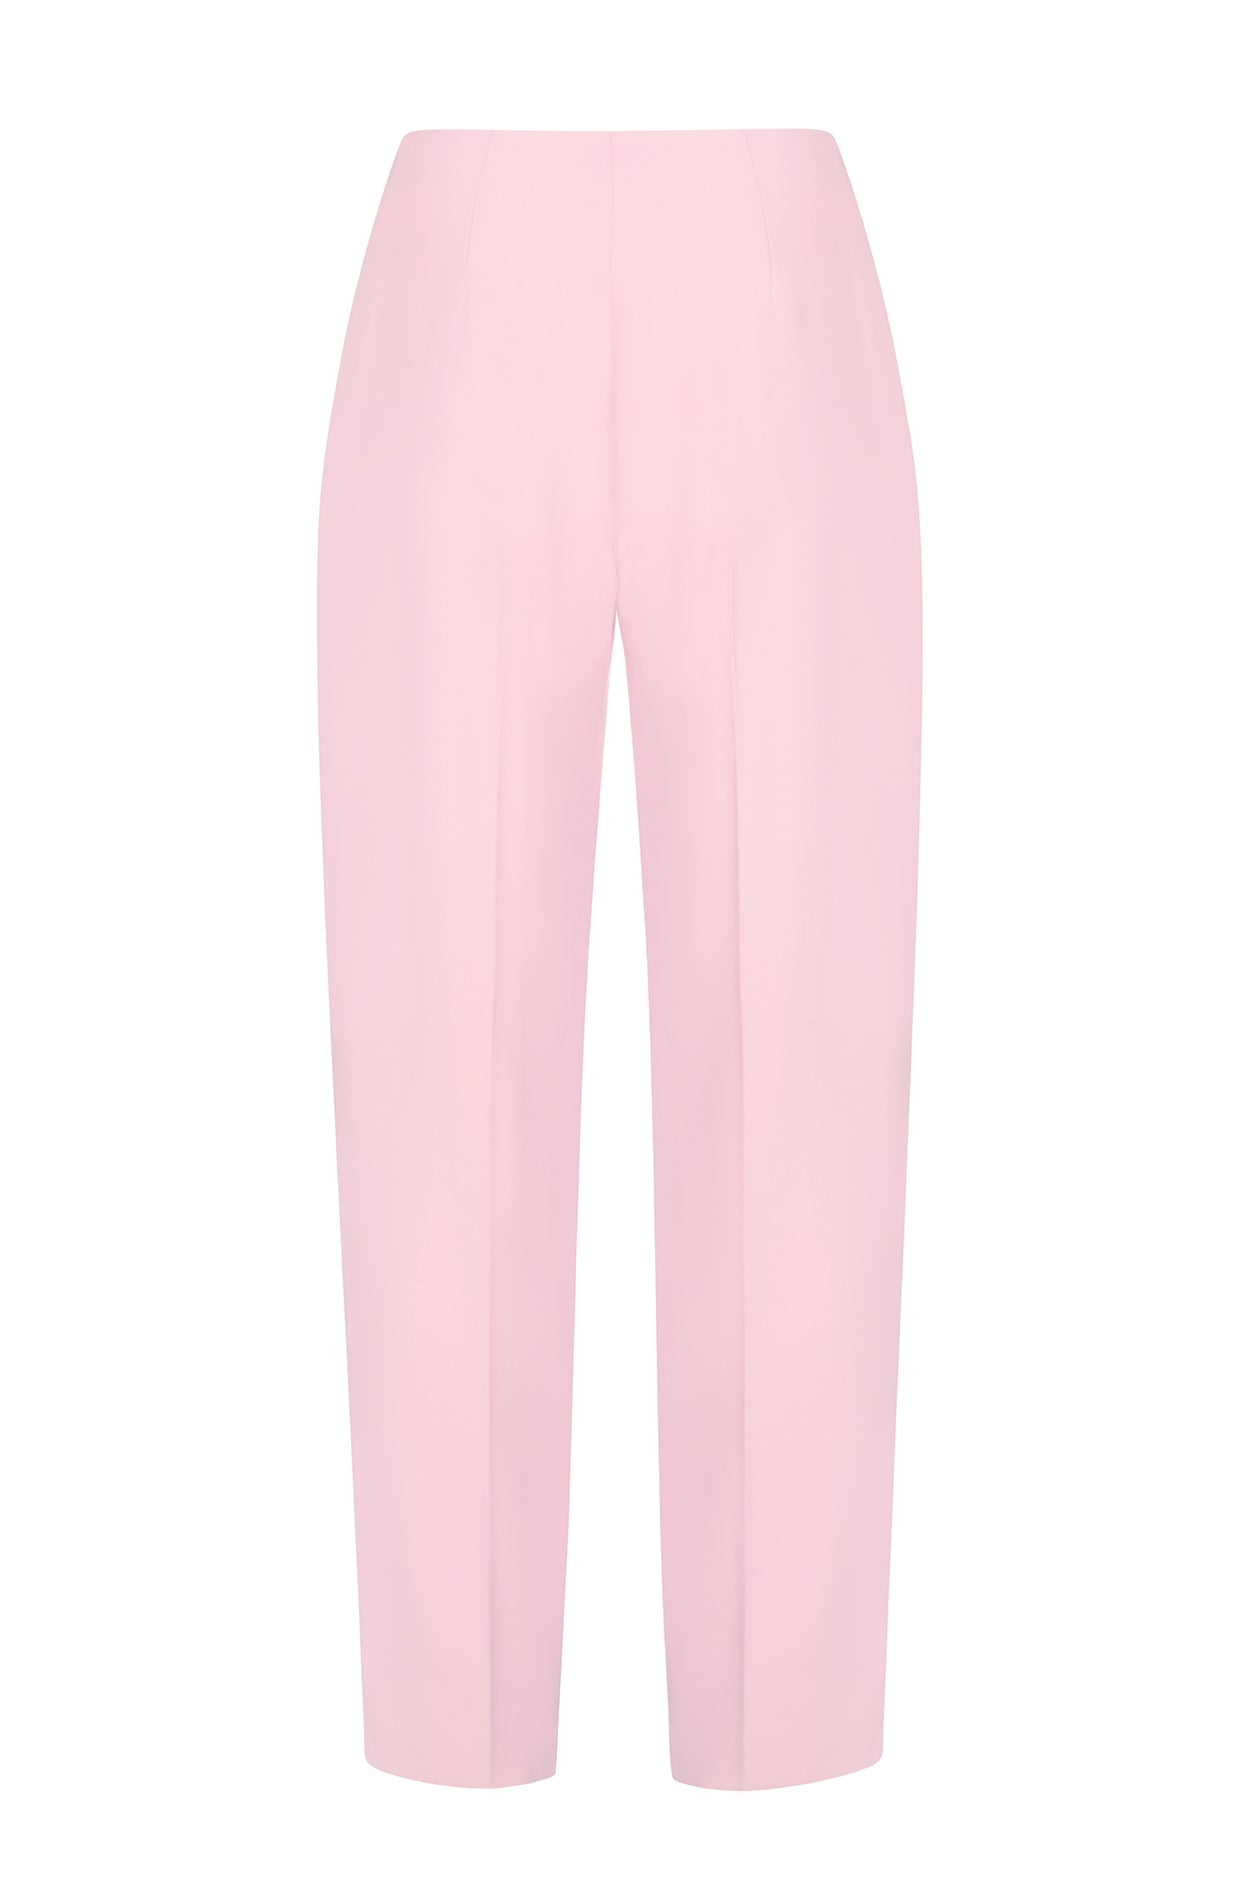 Pale Pink Narrow Trousers in Pale Pink Wool - Phoebe